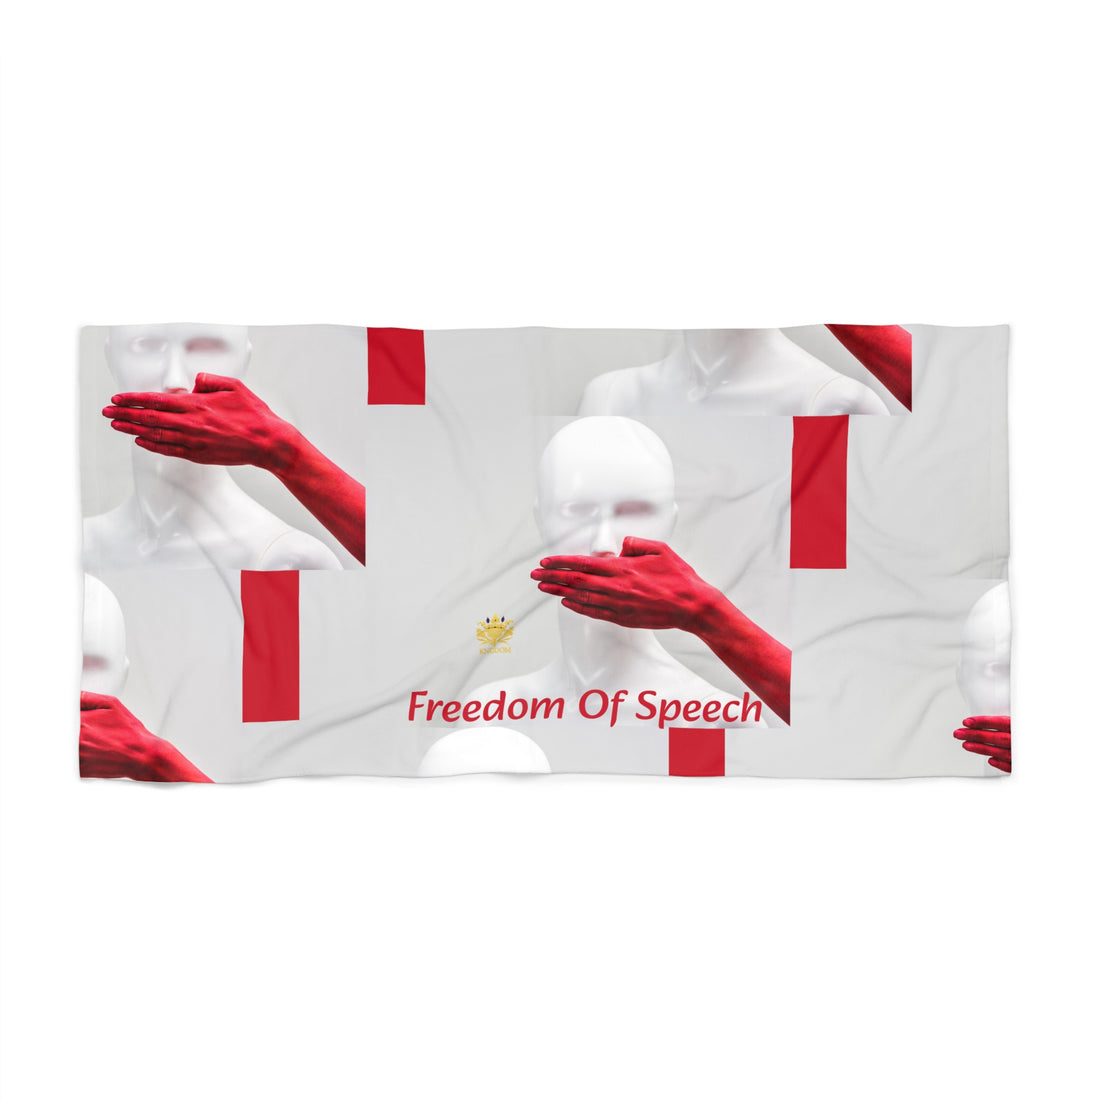 WE ARE AMERICA &quot;Freedom Of Speech&quot;- (THE BLOOD OF THE MARTYRS- Red hand Covering Mouth) Beach Towel W/ Kngdom Logo